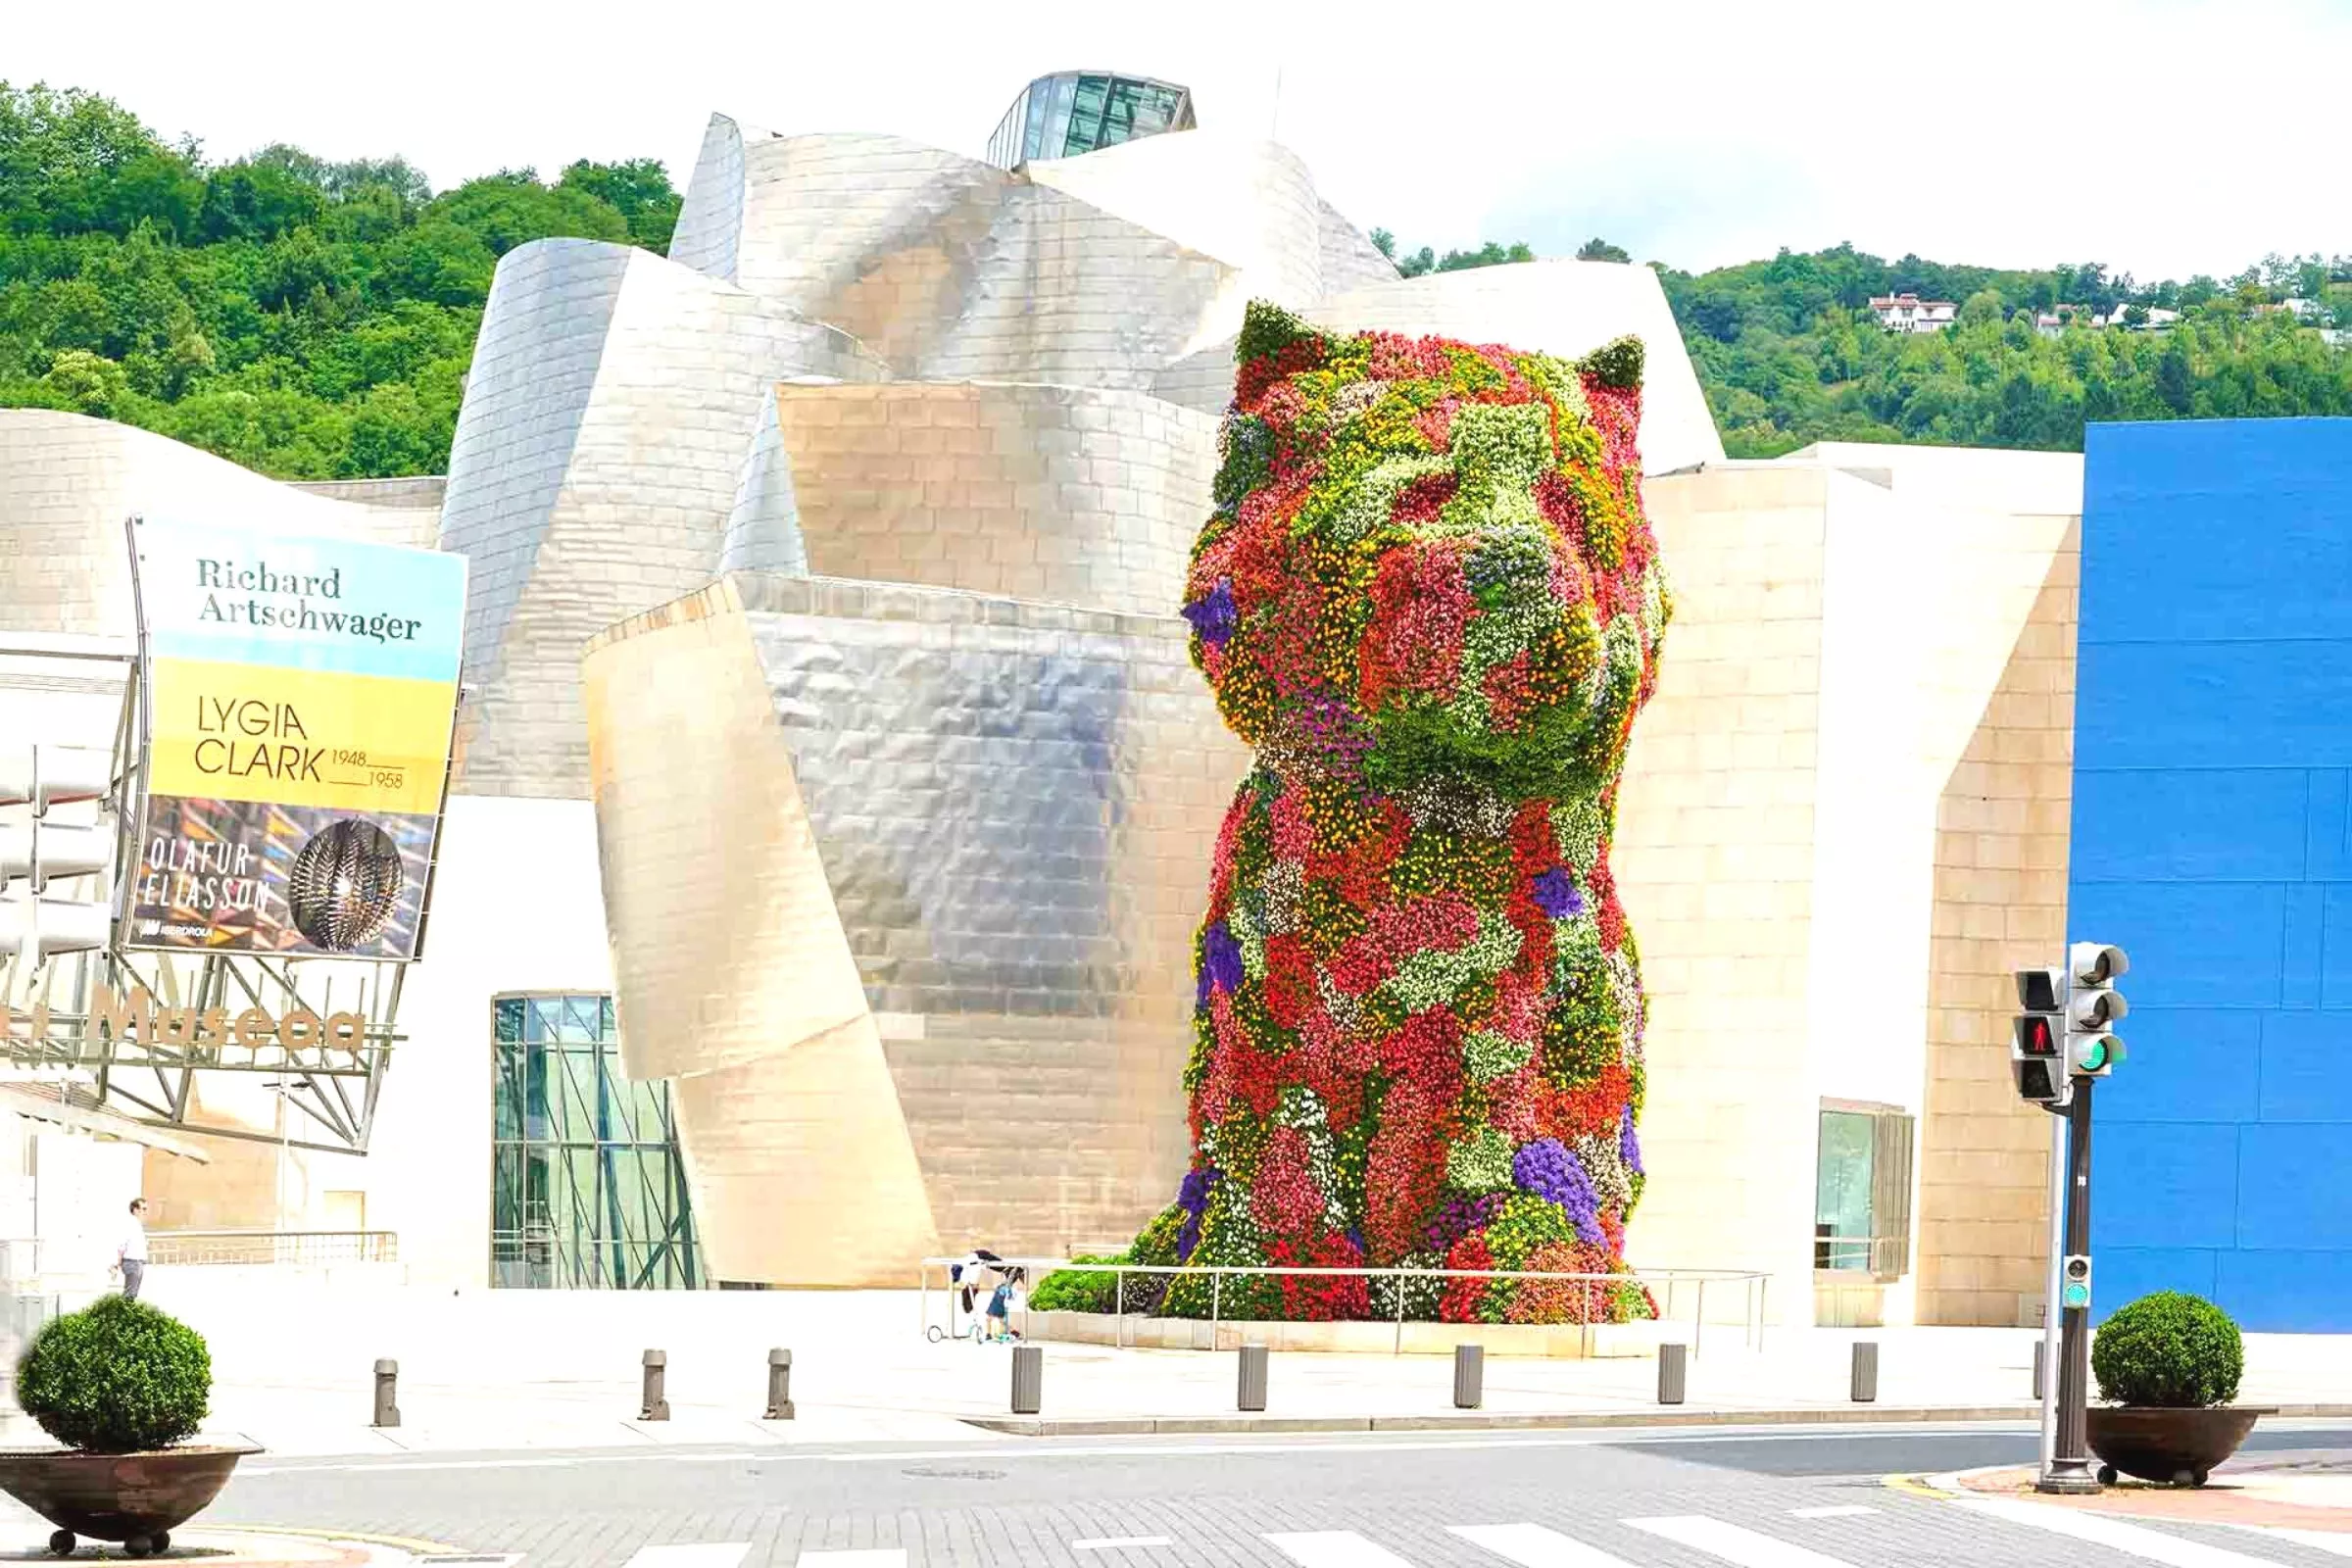 Puppy sculpture with flowers